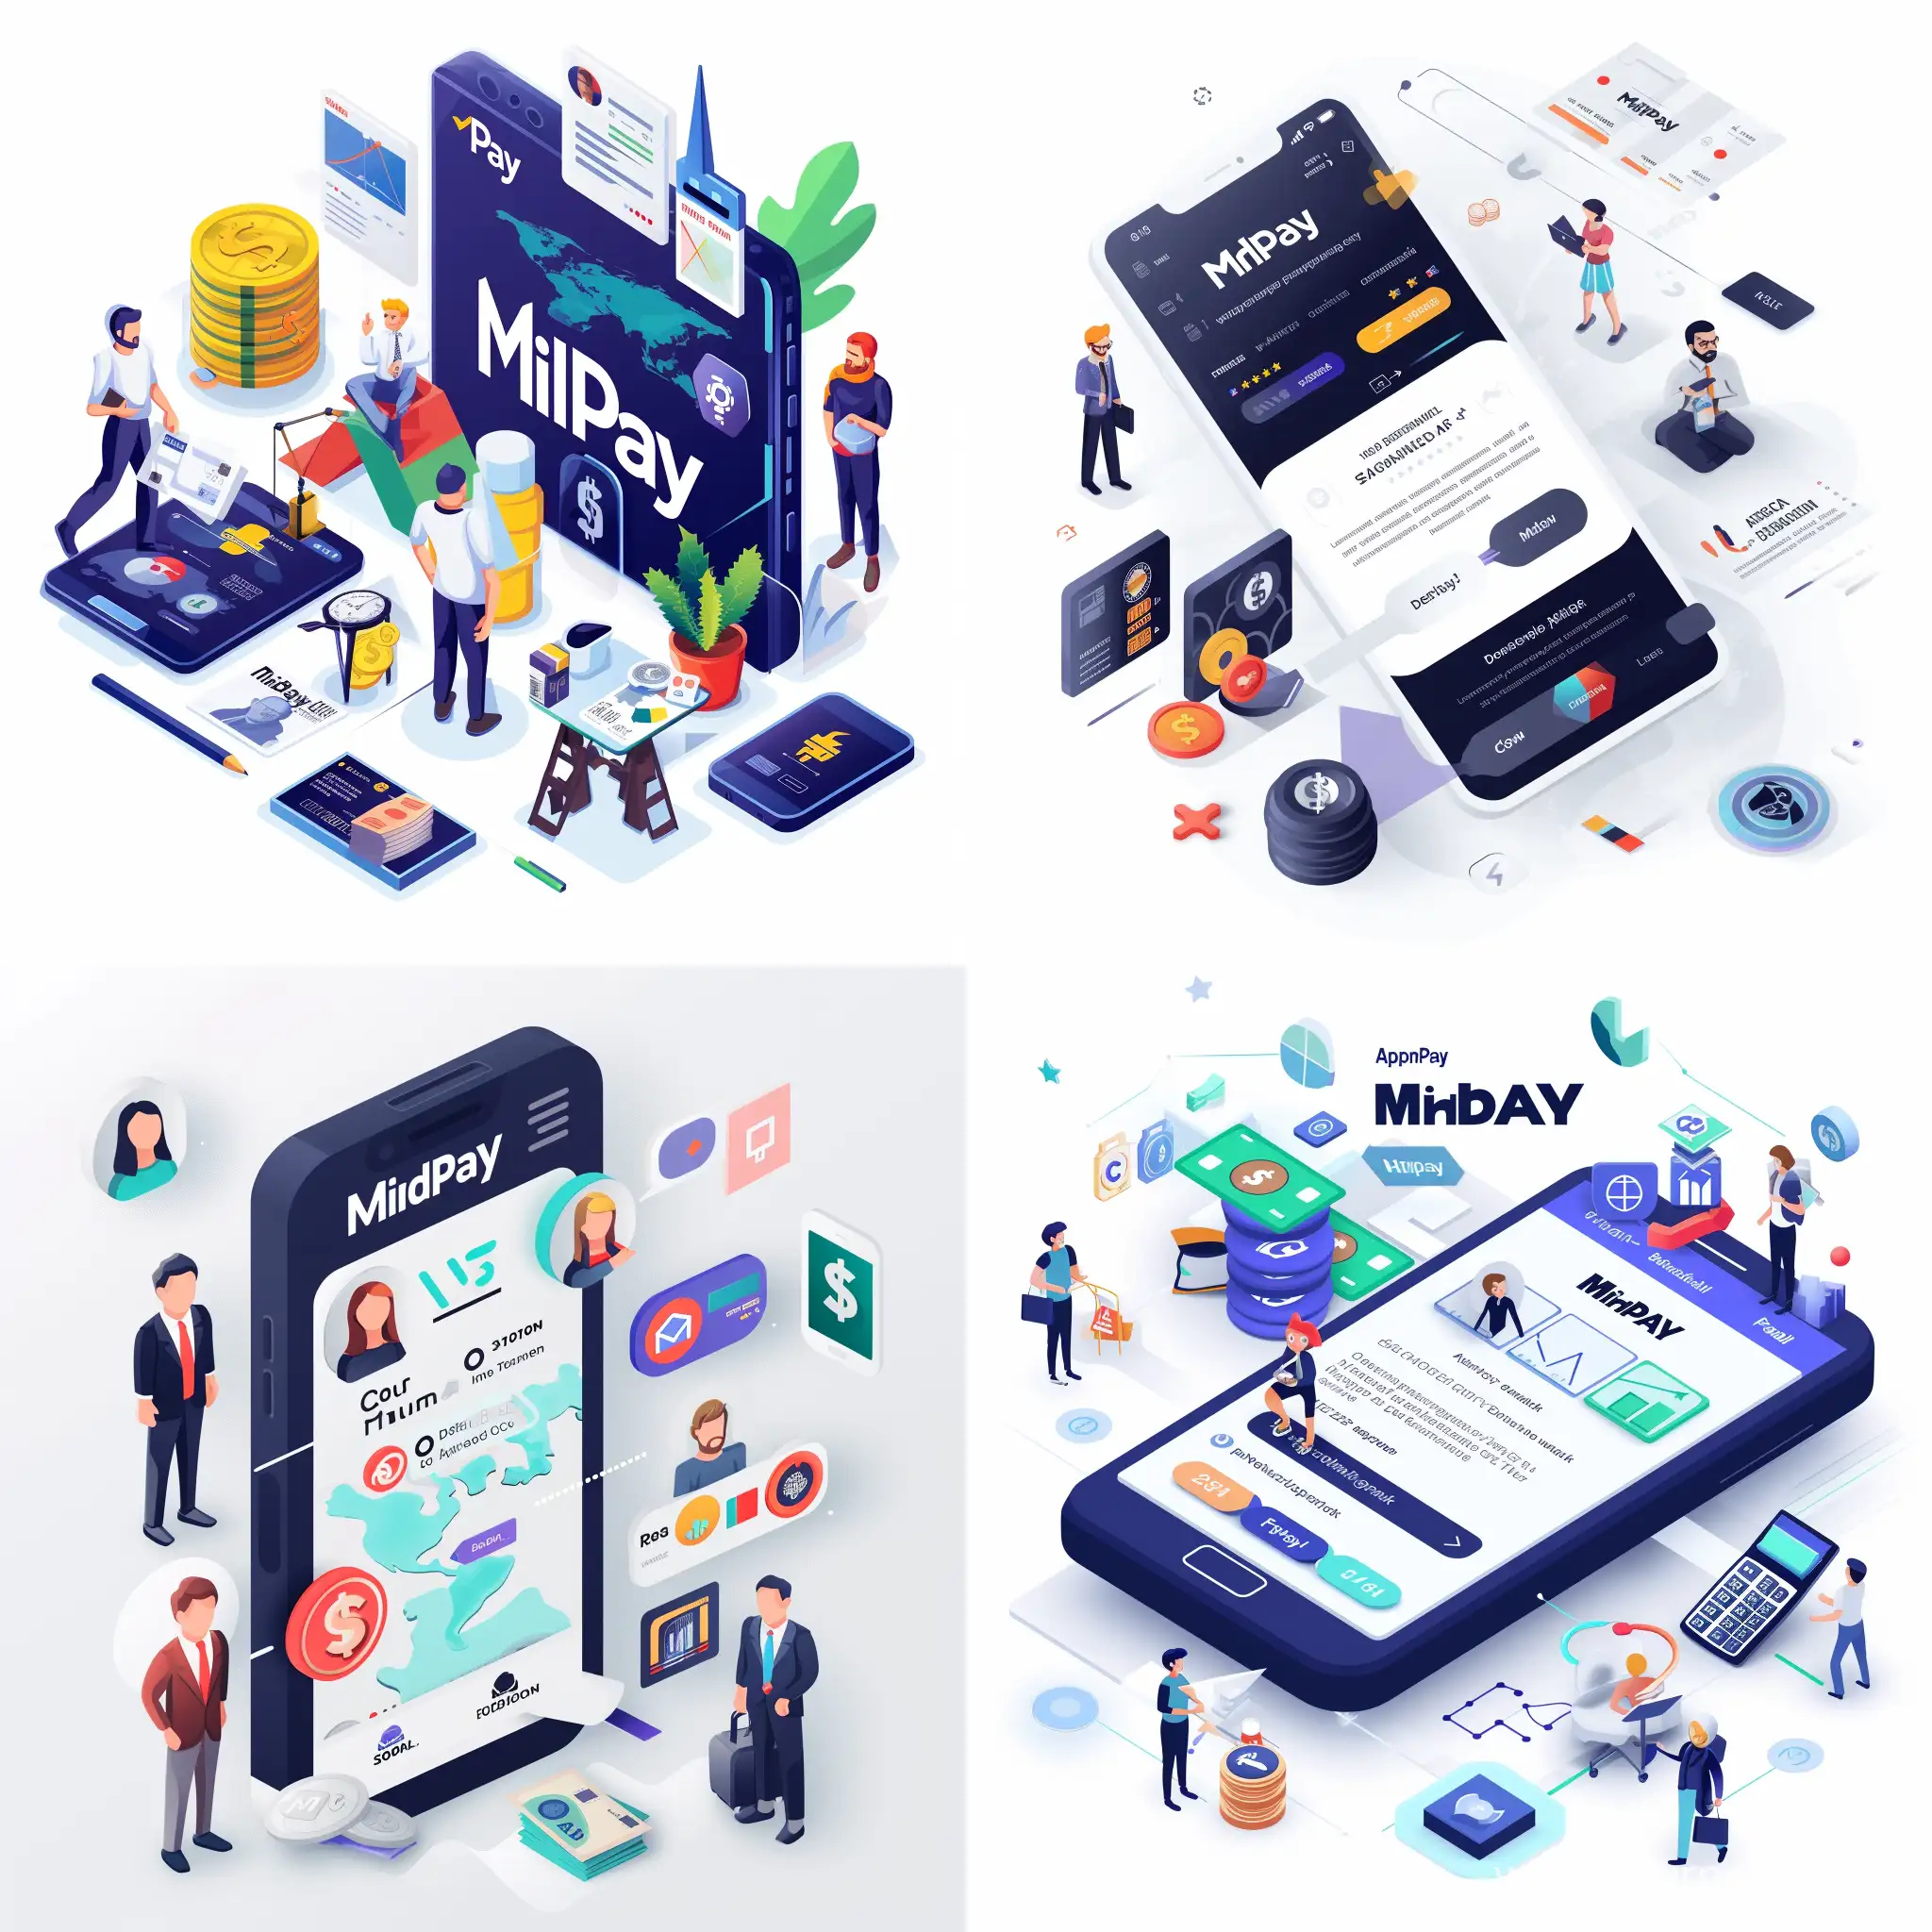 creating a visualization for an application for currency exchange in different countries, the name of the application is MidPay, the visualization should show that this application is for everyone: businessmen, artists, designers, developers, etc.